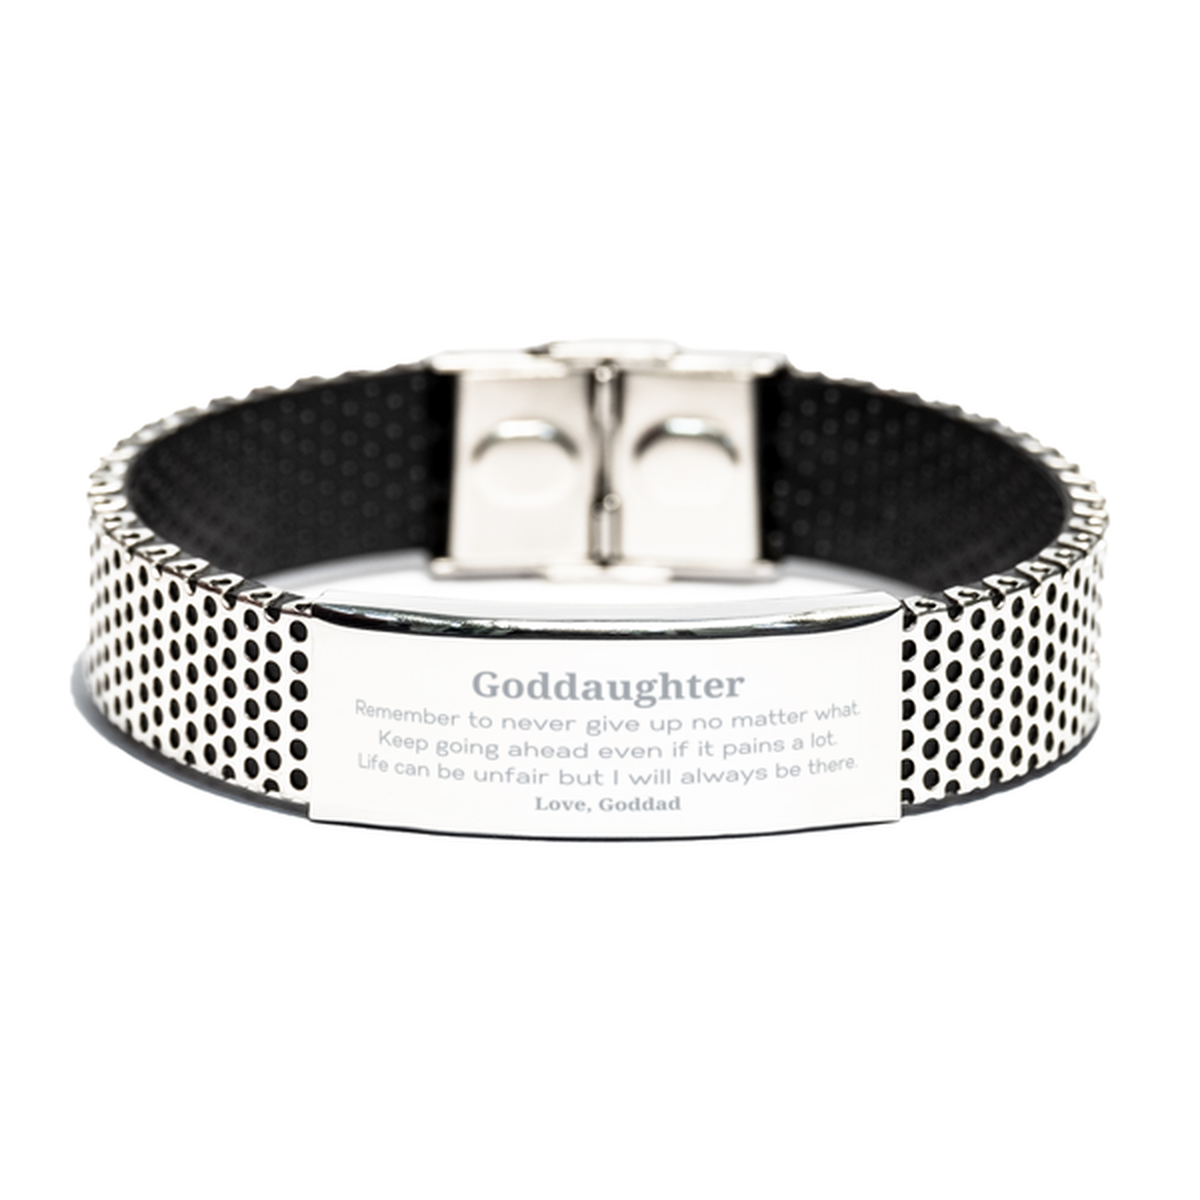 Goddaughter Motivational Gifts from Goddad, Remember to never give up no matter what, Inspirational Birthday Stainless Steel Bracelet for Goddaughter